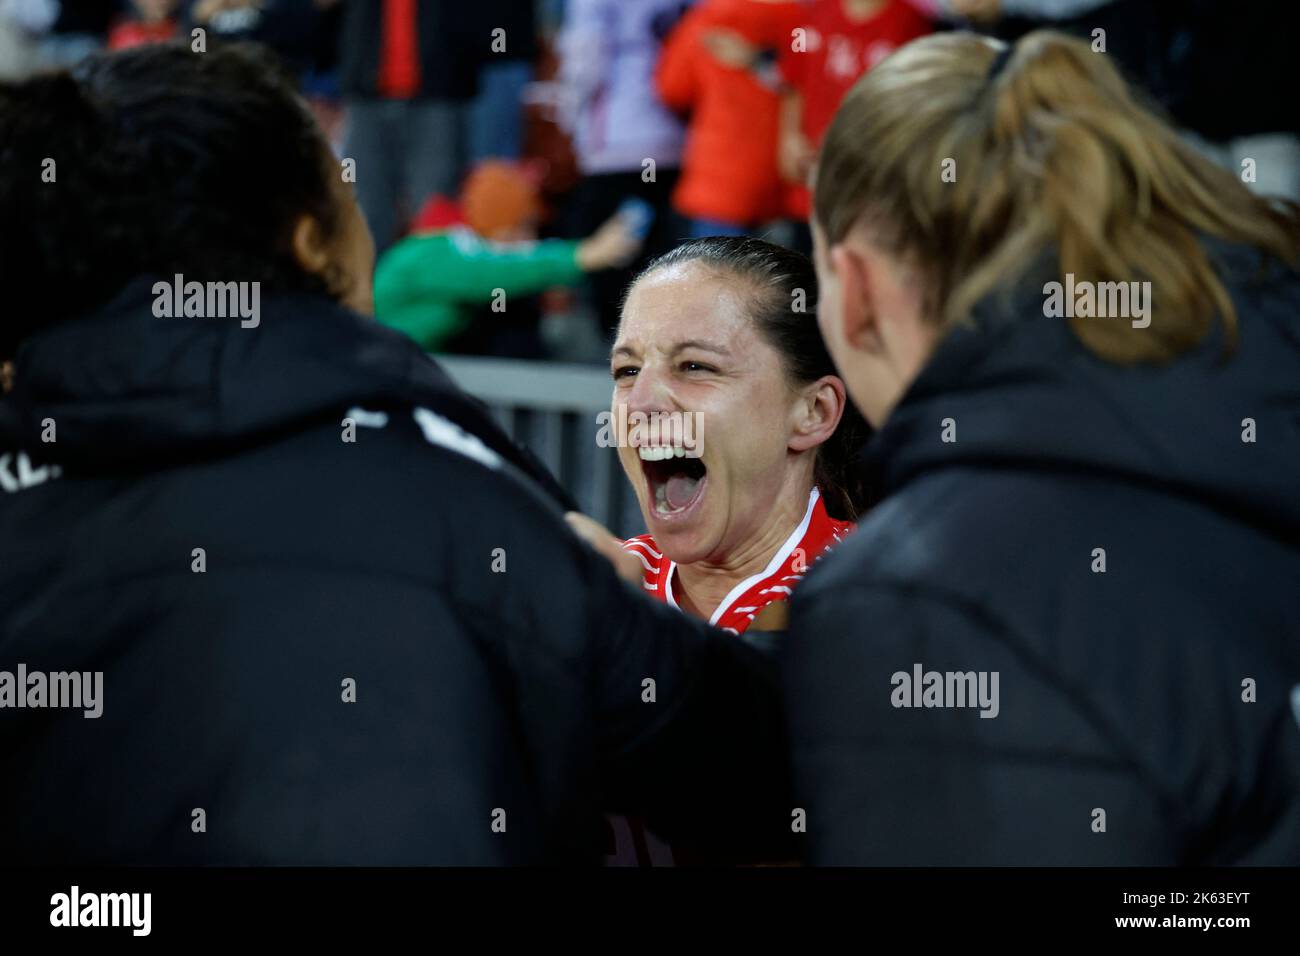 Soccer Football - FIFA Women's World Cup - UEFA Qualifiers - Switzerland v Wales - Stadion Letzigrund, Zurich, Switzerland - October 11, 2022 Switzerland's Fabienne Humm celebrates scoring their second goal with teammates REUTERS/Stefan Wermuth Stock Photo